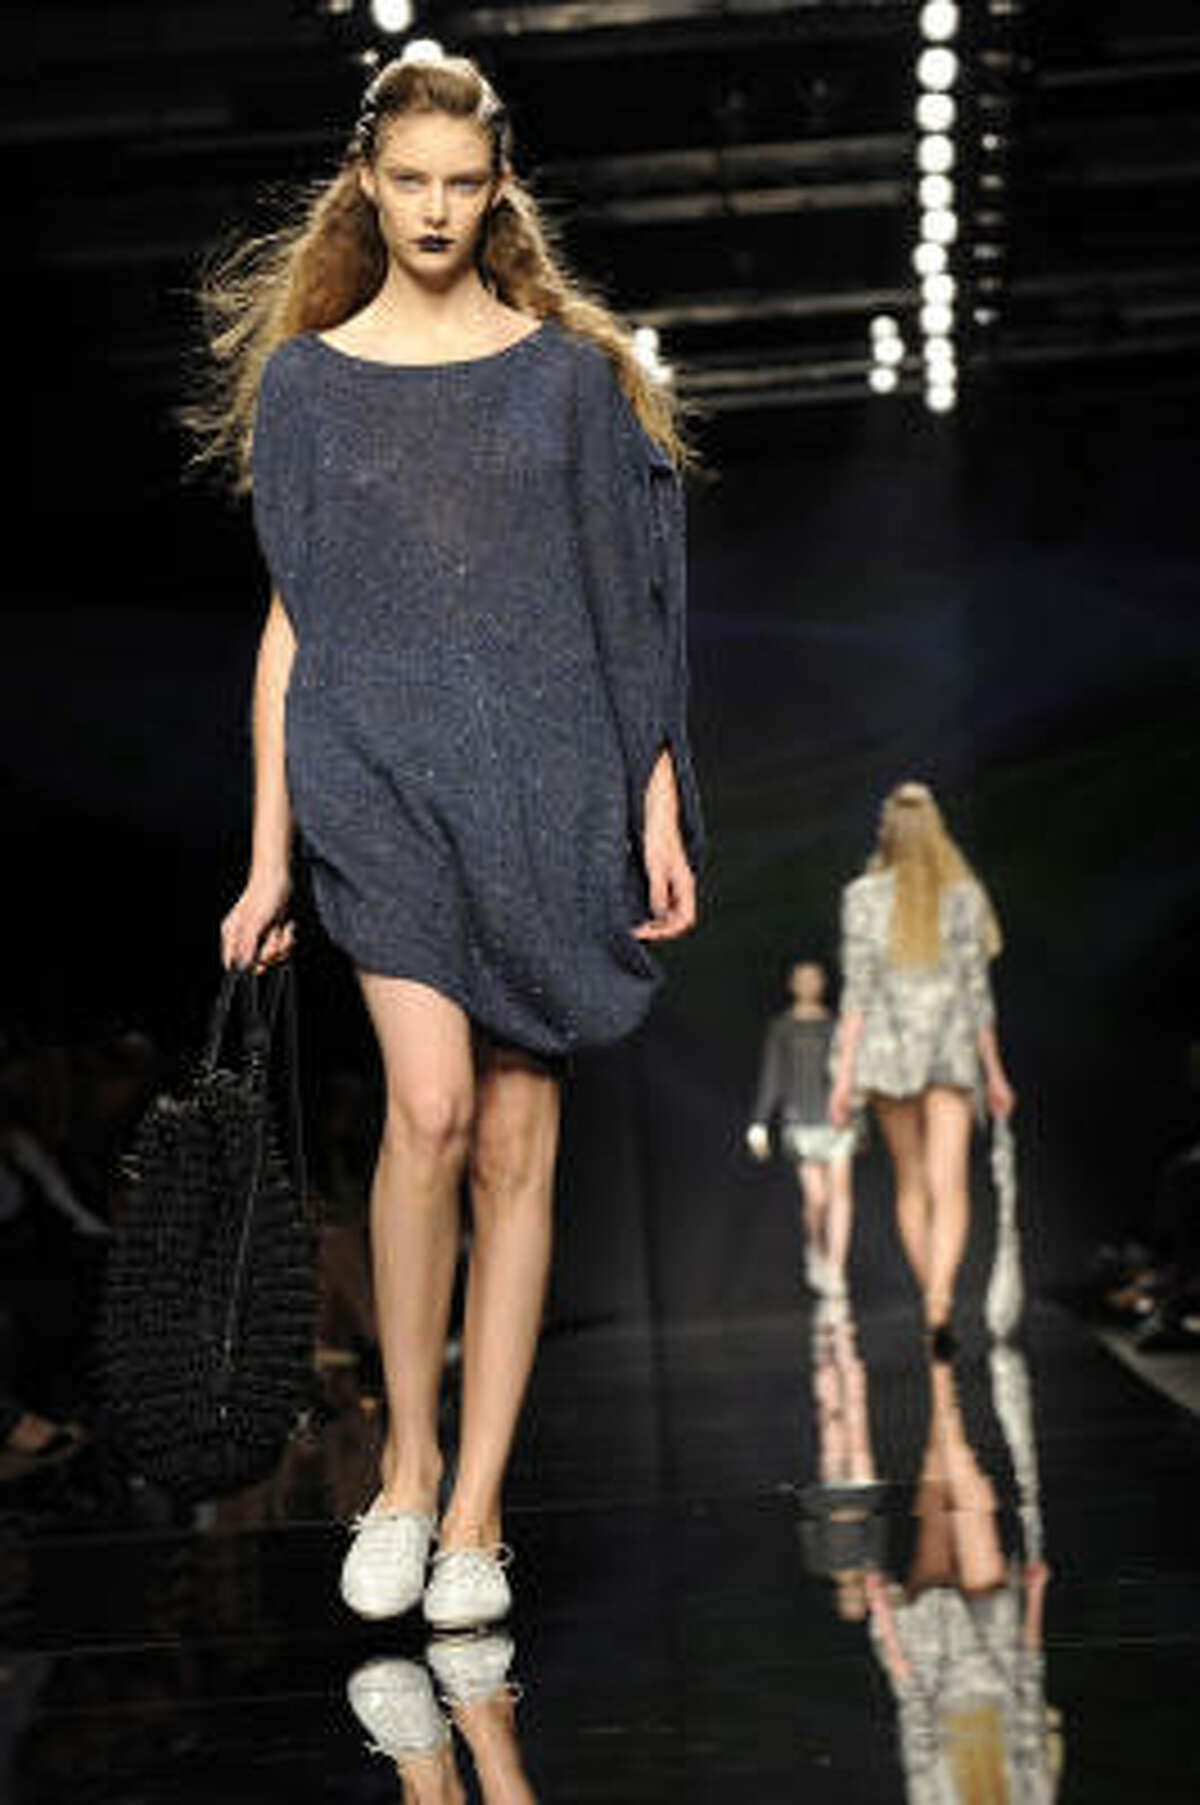 Anteprima Spring/Summer 2010 ready-to-wear collection